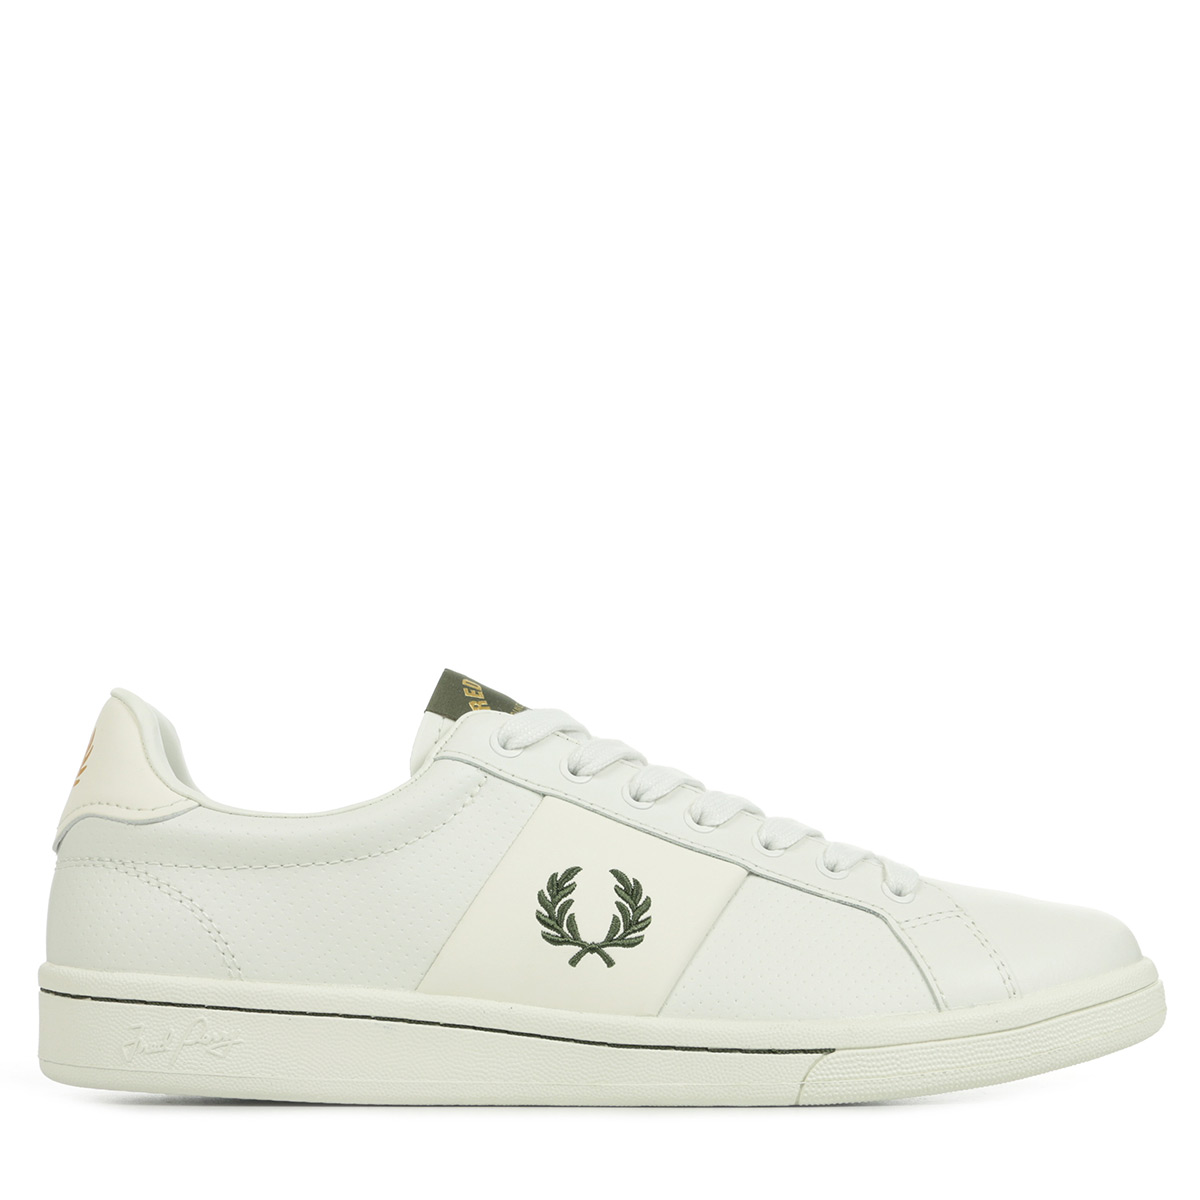 Fred Perry "B721 Perf"